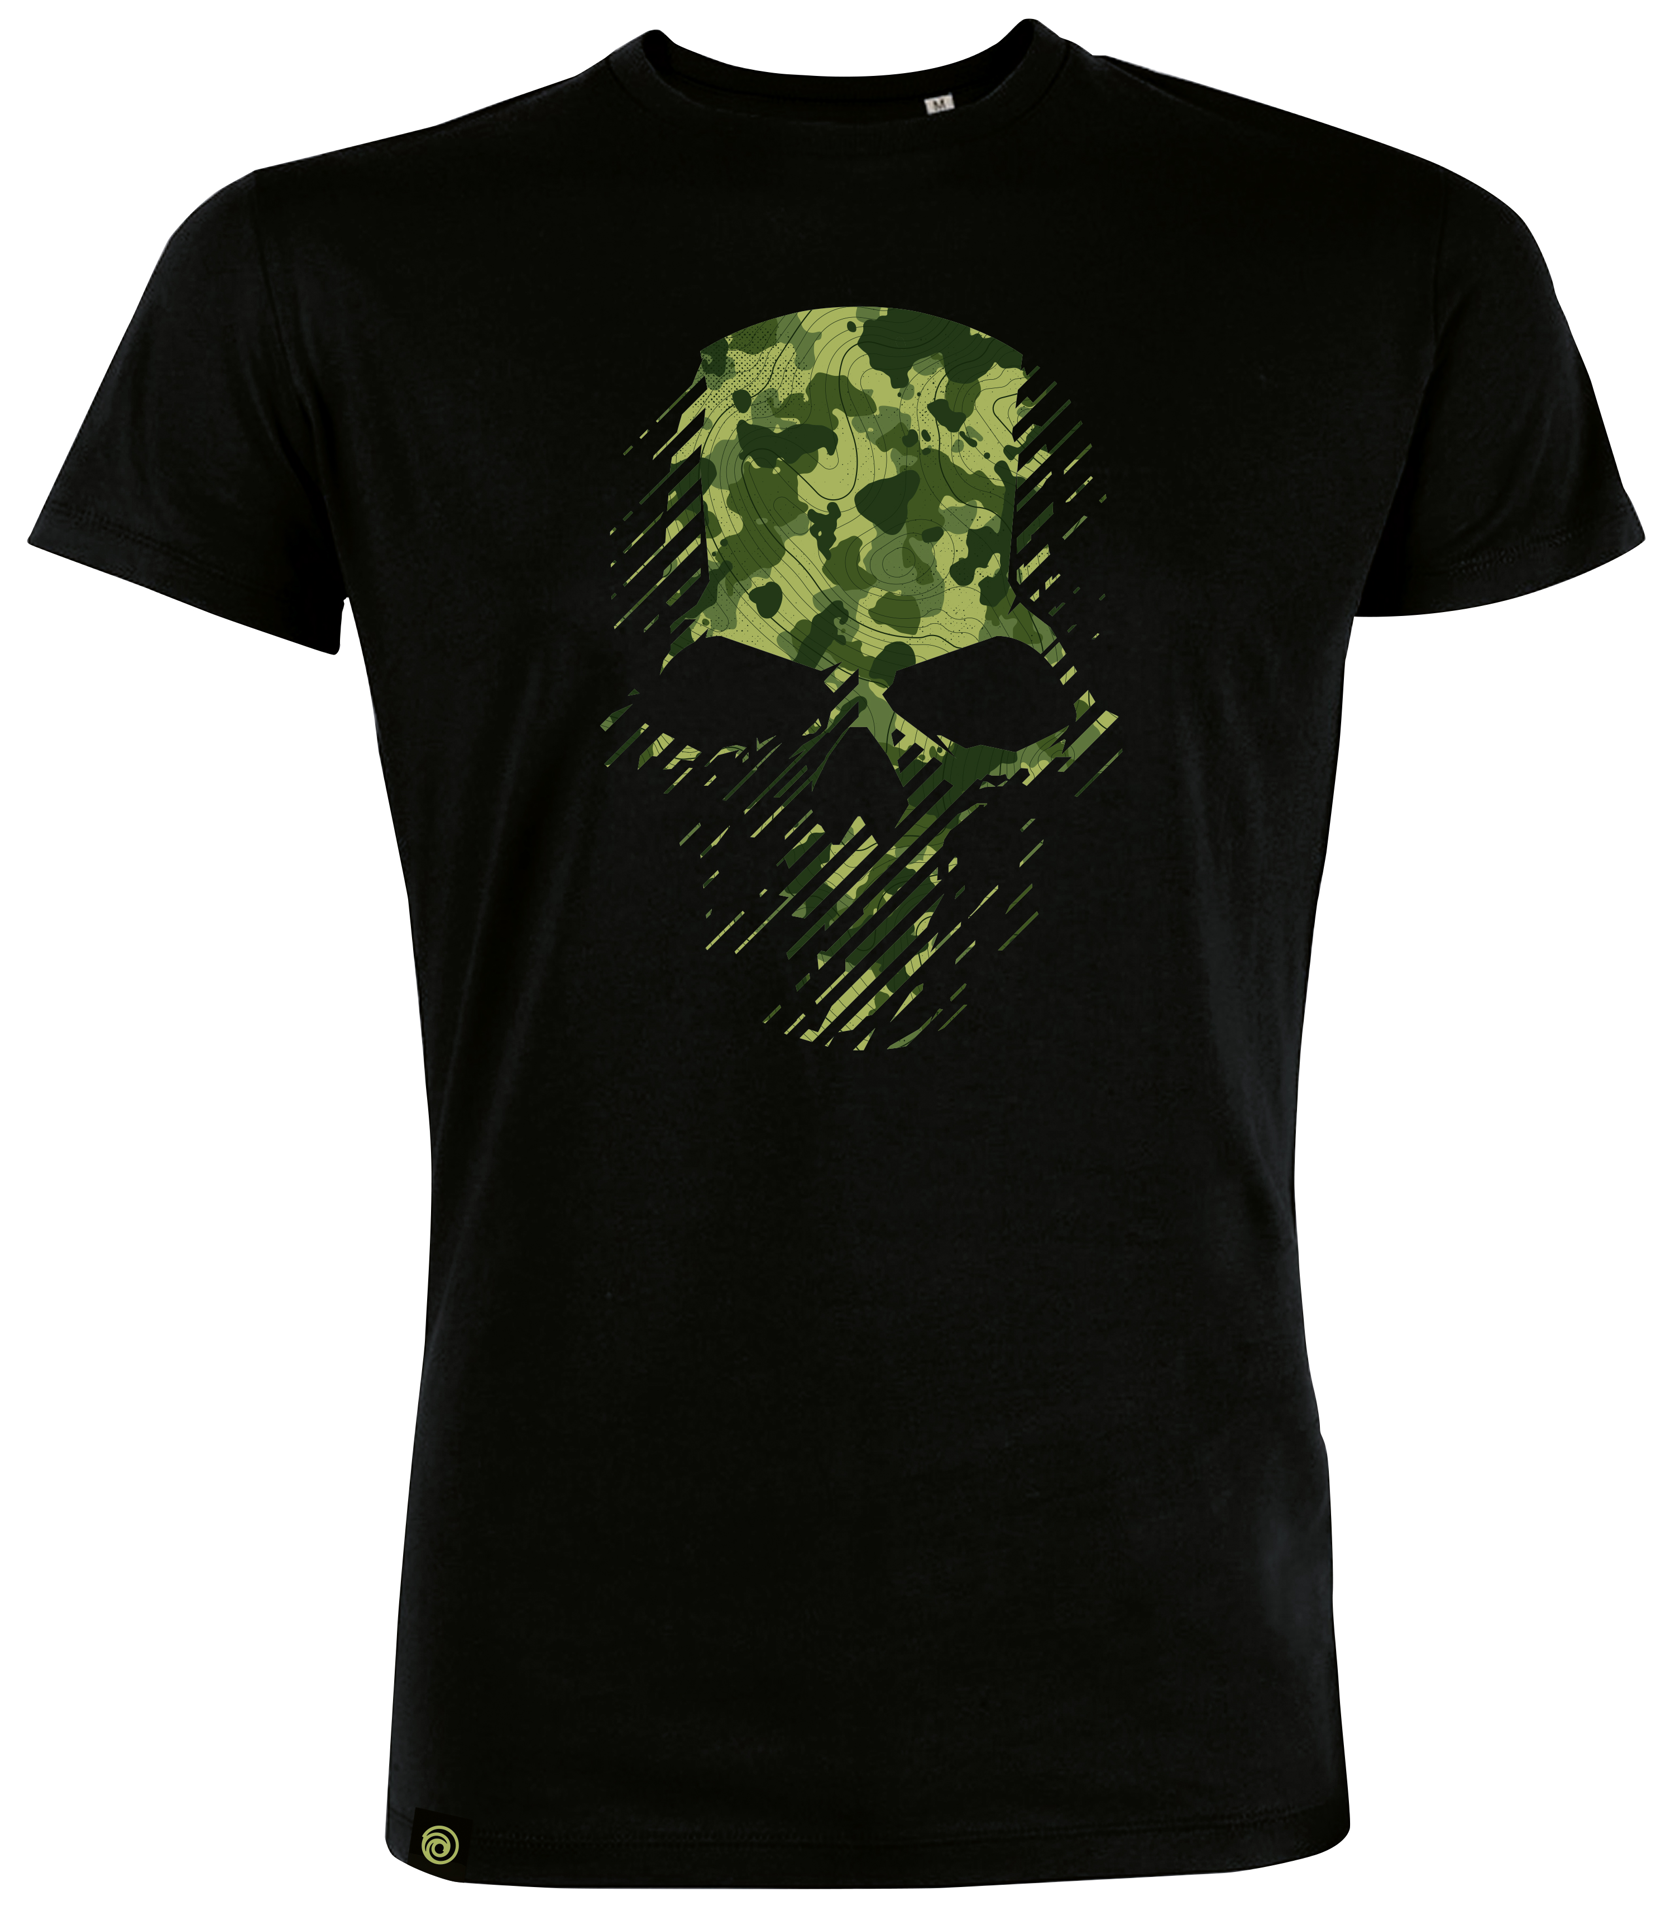 Ghost Recon Breakpoint - Ubisoft Consumer Show 2019 T-Shirt - L